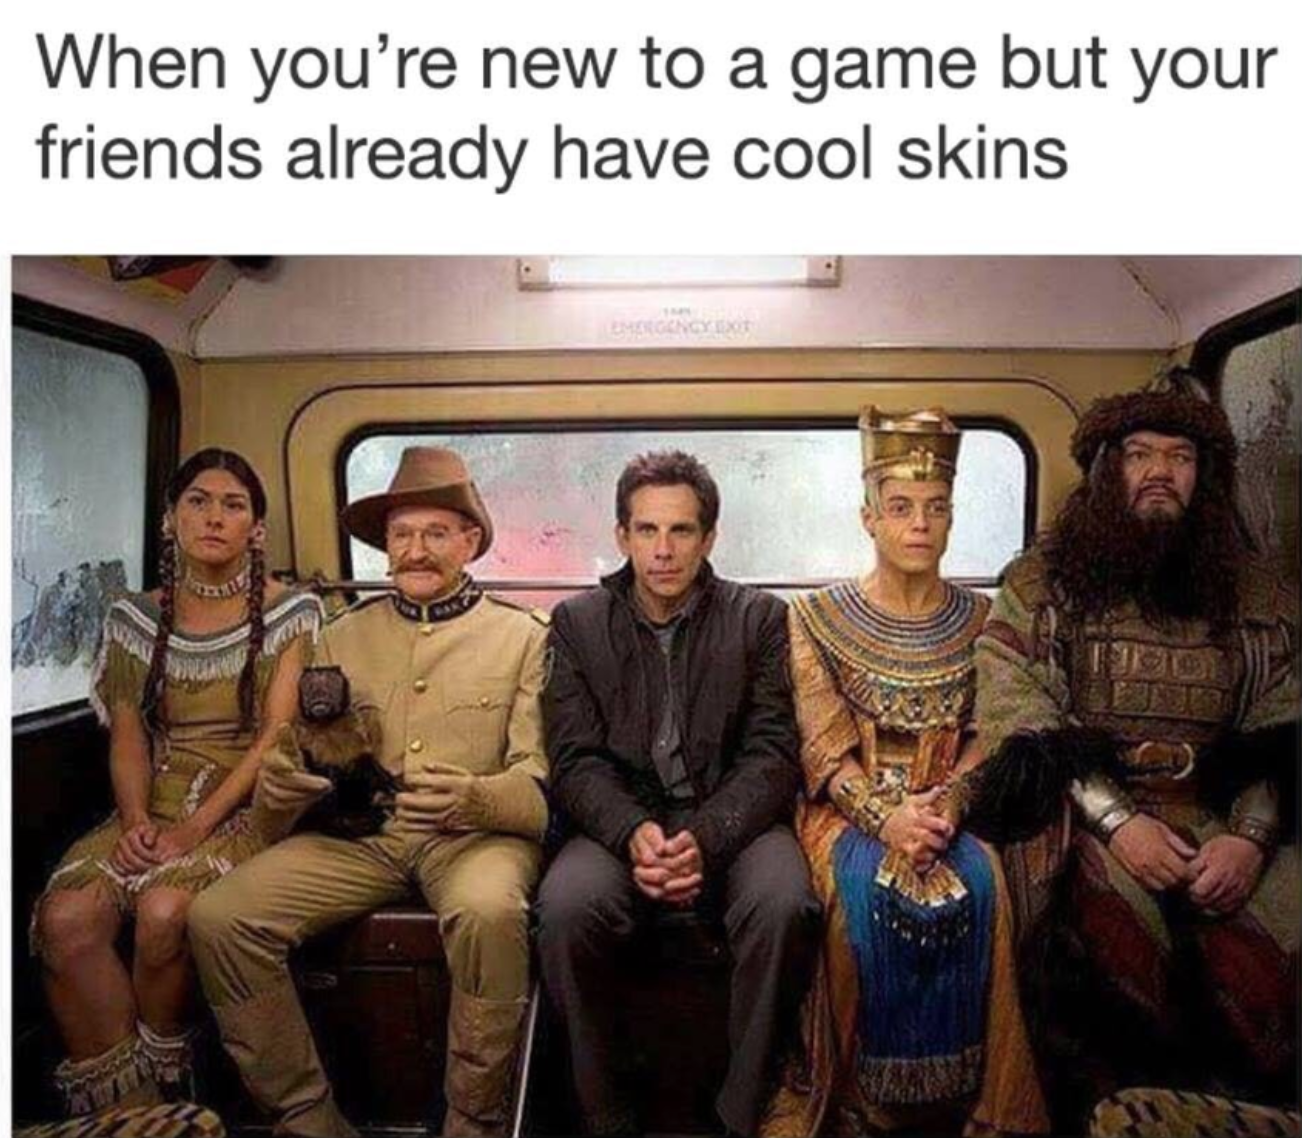 funny gaming memes - video game skins meme - When you're new to a game but your friends already have cool skins G